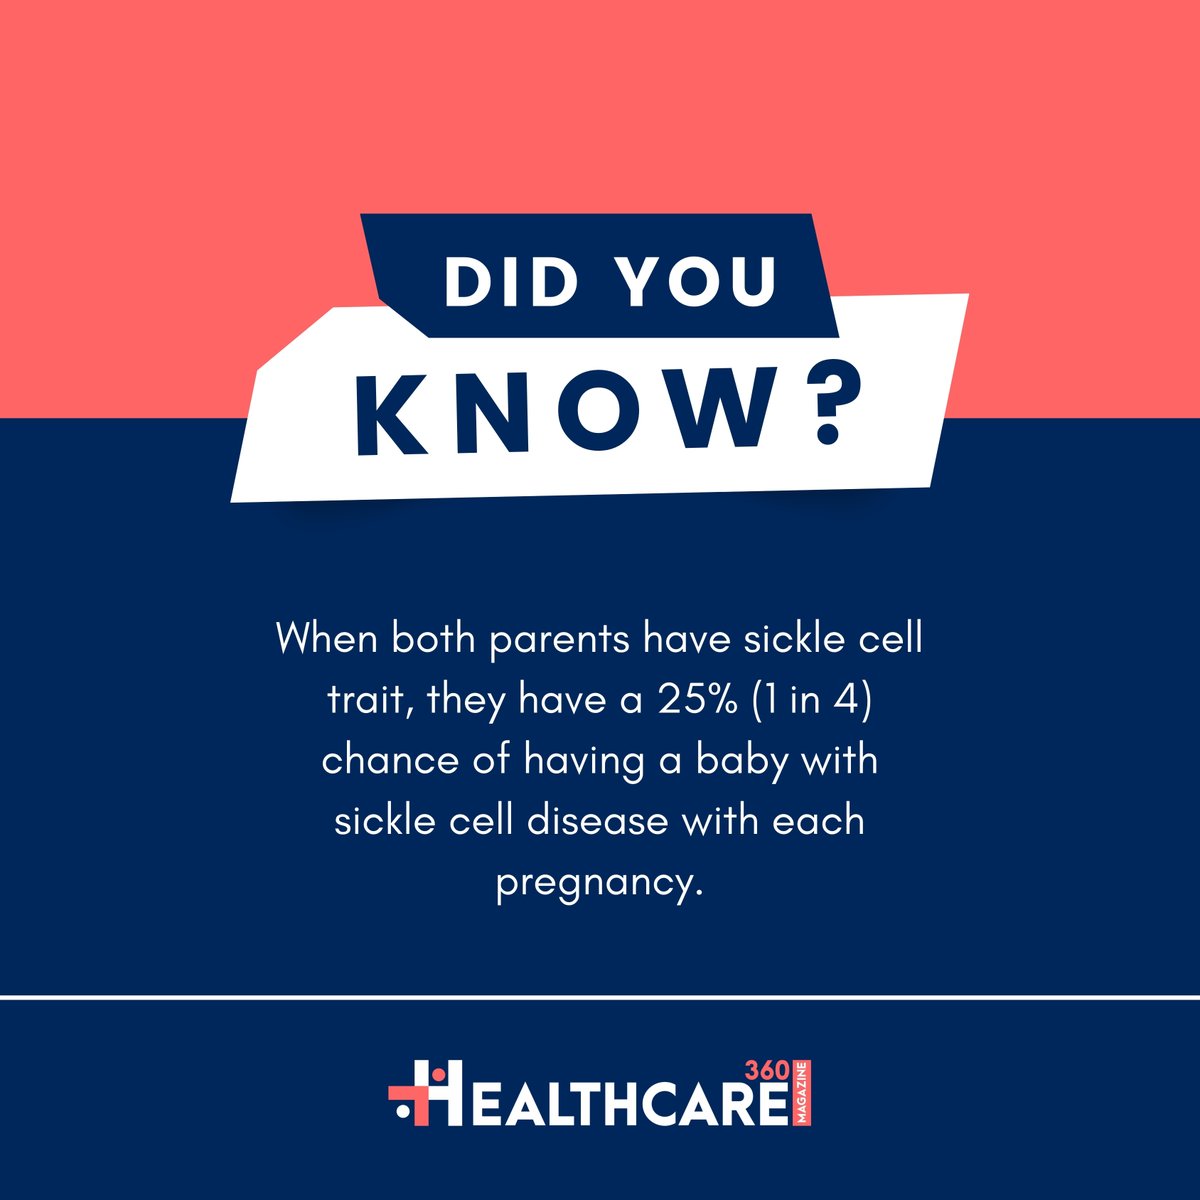 Carrier screening is recommended before pregnancy to understand your risk.
P.S. Share this info with someone who might find it helpful!

#SickleCellAwareness #GeneticHealth #InheritedConditions #ParentalScreening #HealthEducation #FamilyHealth #SickleCellTrait #PreventSickleCell